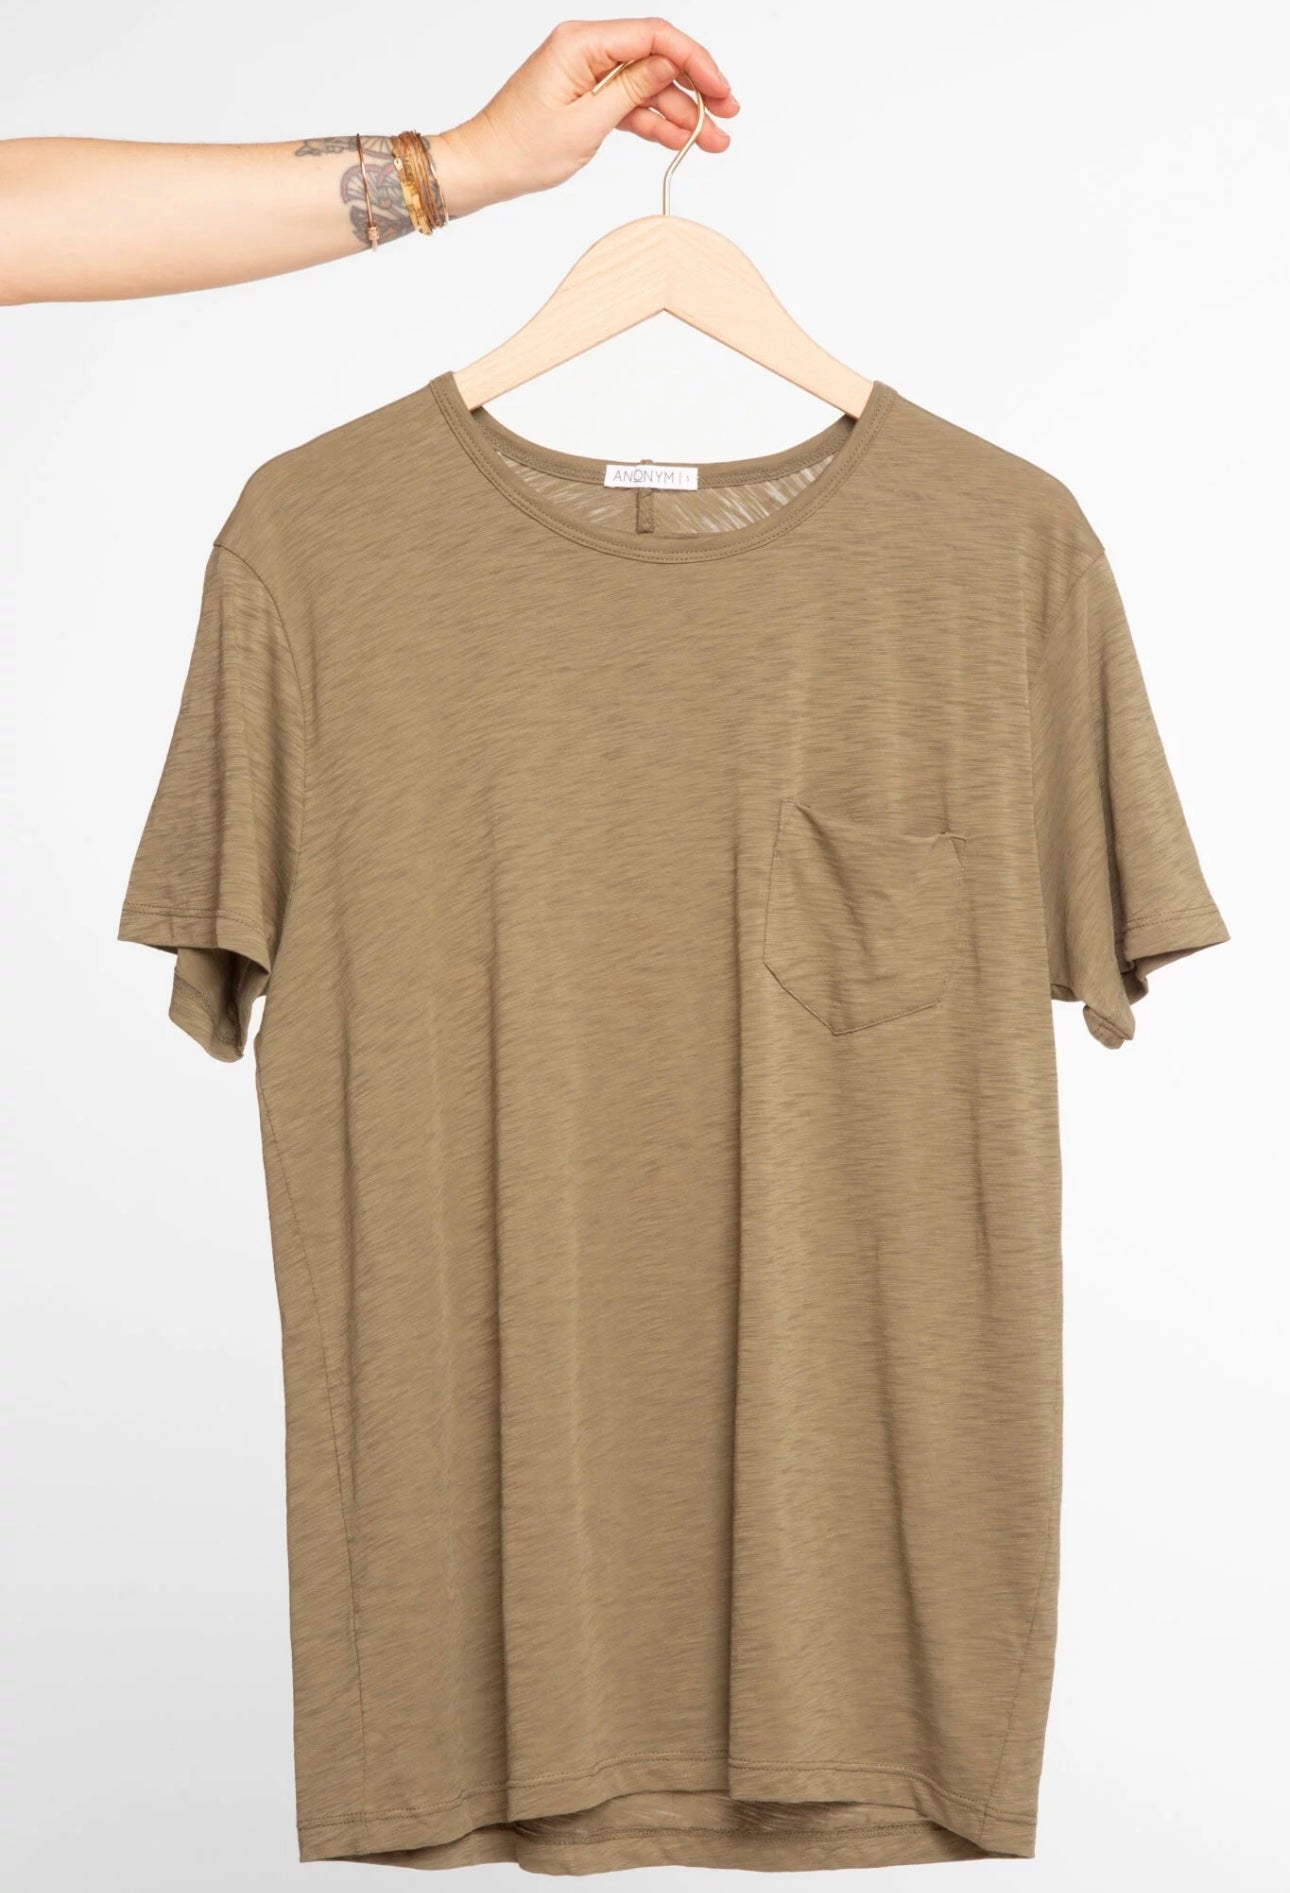 Anonym - T-shirt Hector Olive Flamme